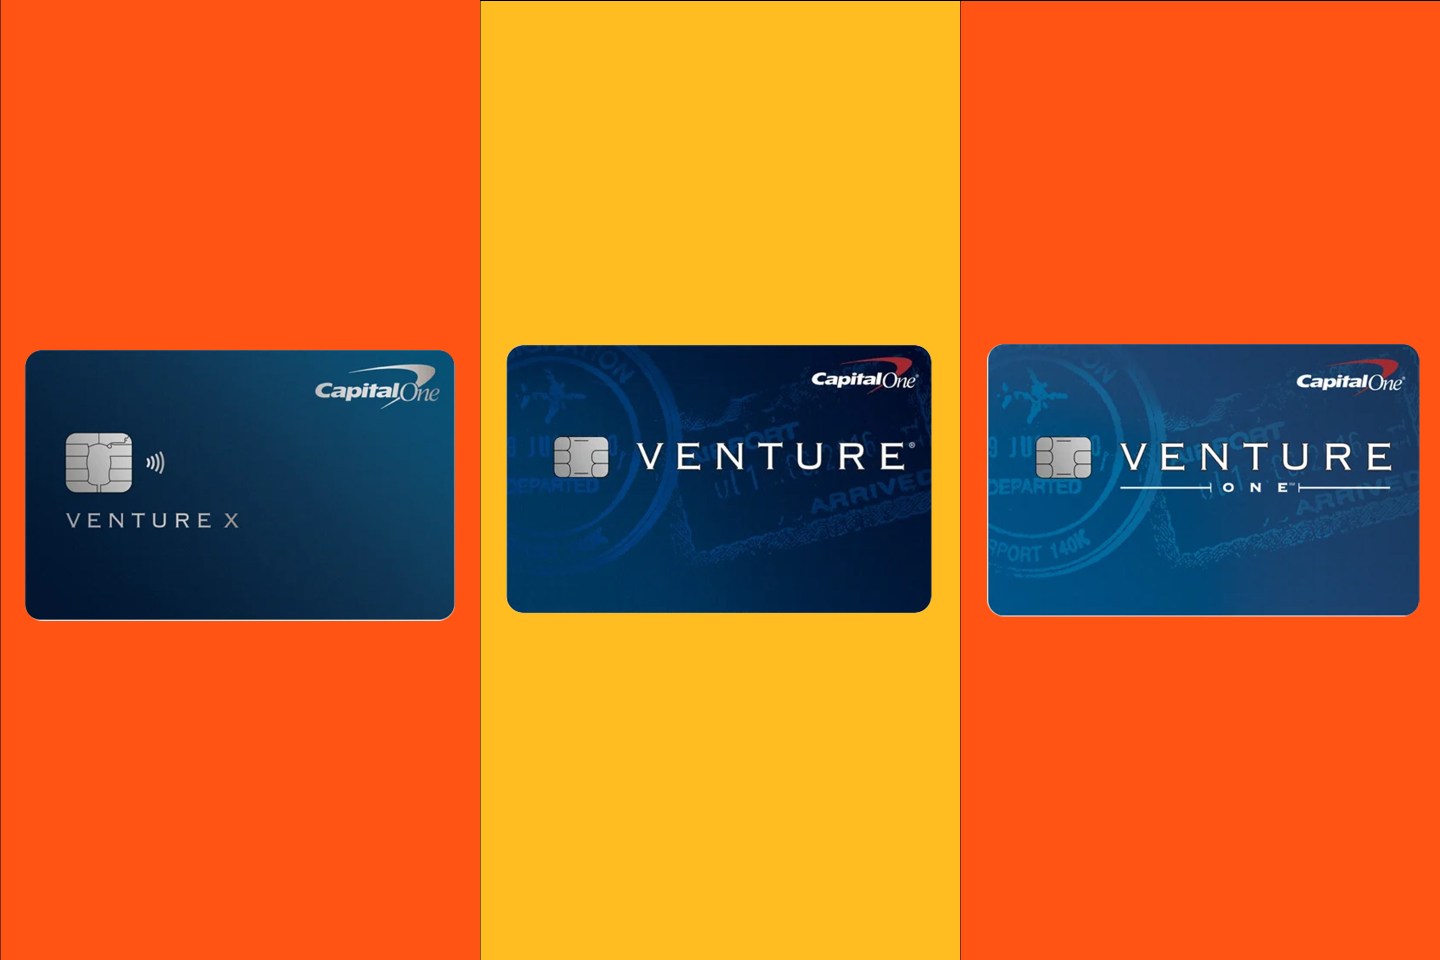 Photo of three credit cards in 3 different columns. Capital One Venture X with a bright orange background, Capital One Venture with a light orange background and Capital One venture One Credit Card with a bright orange background